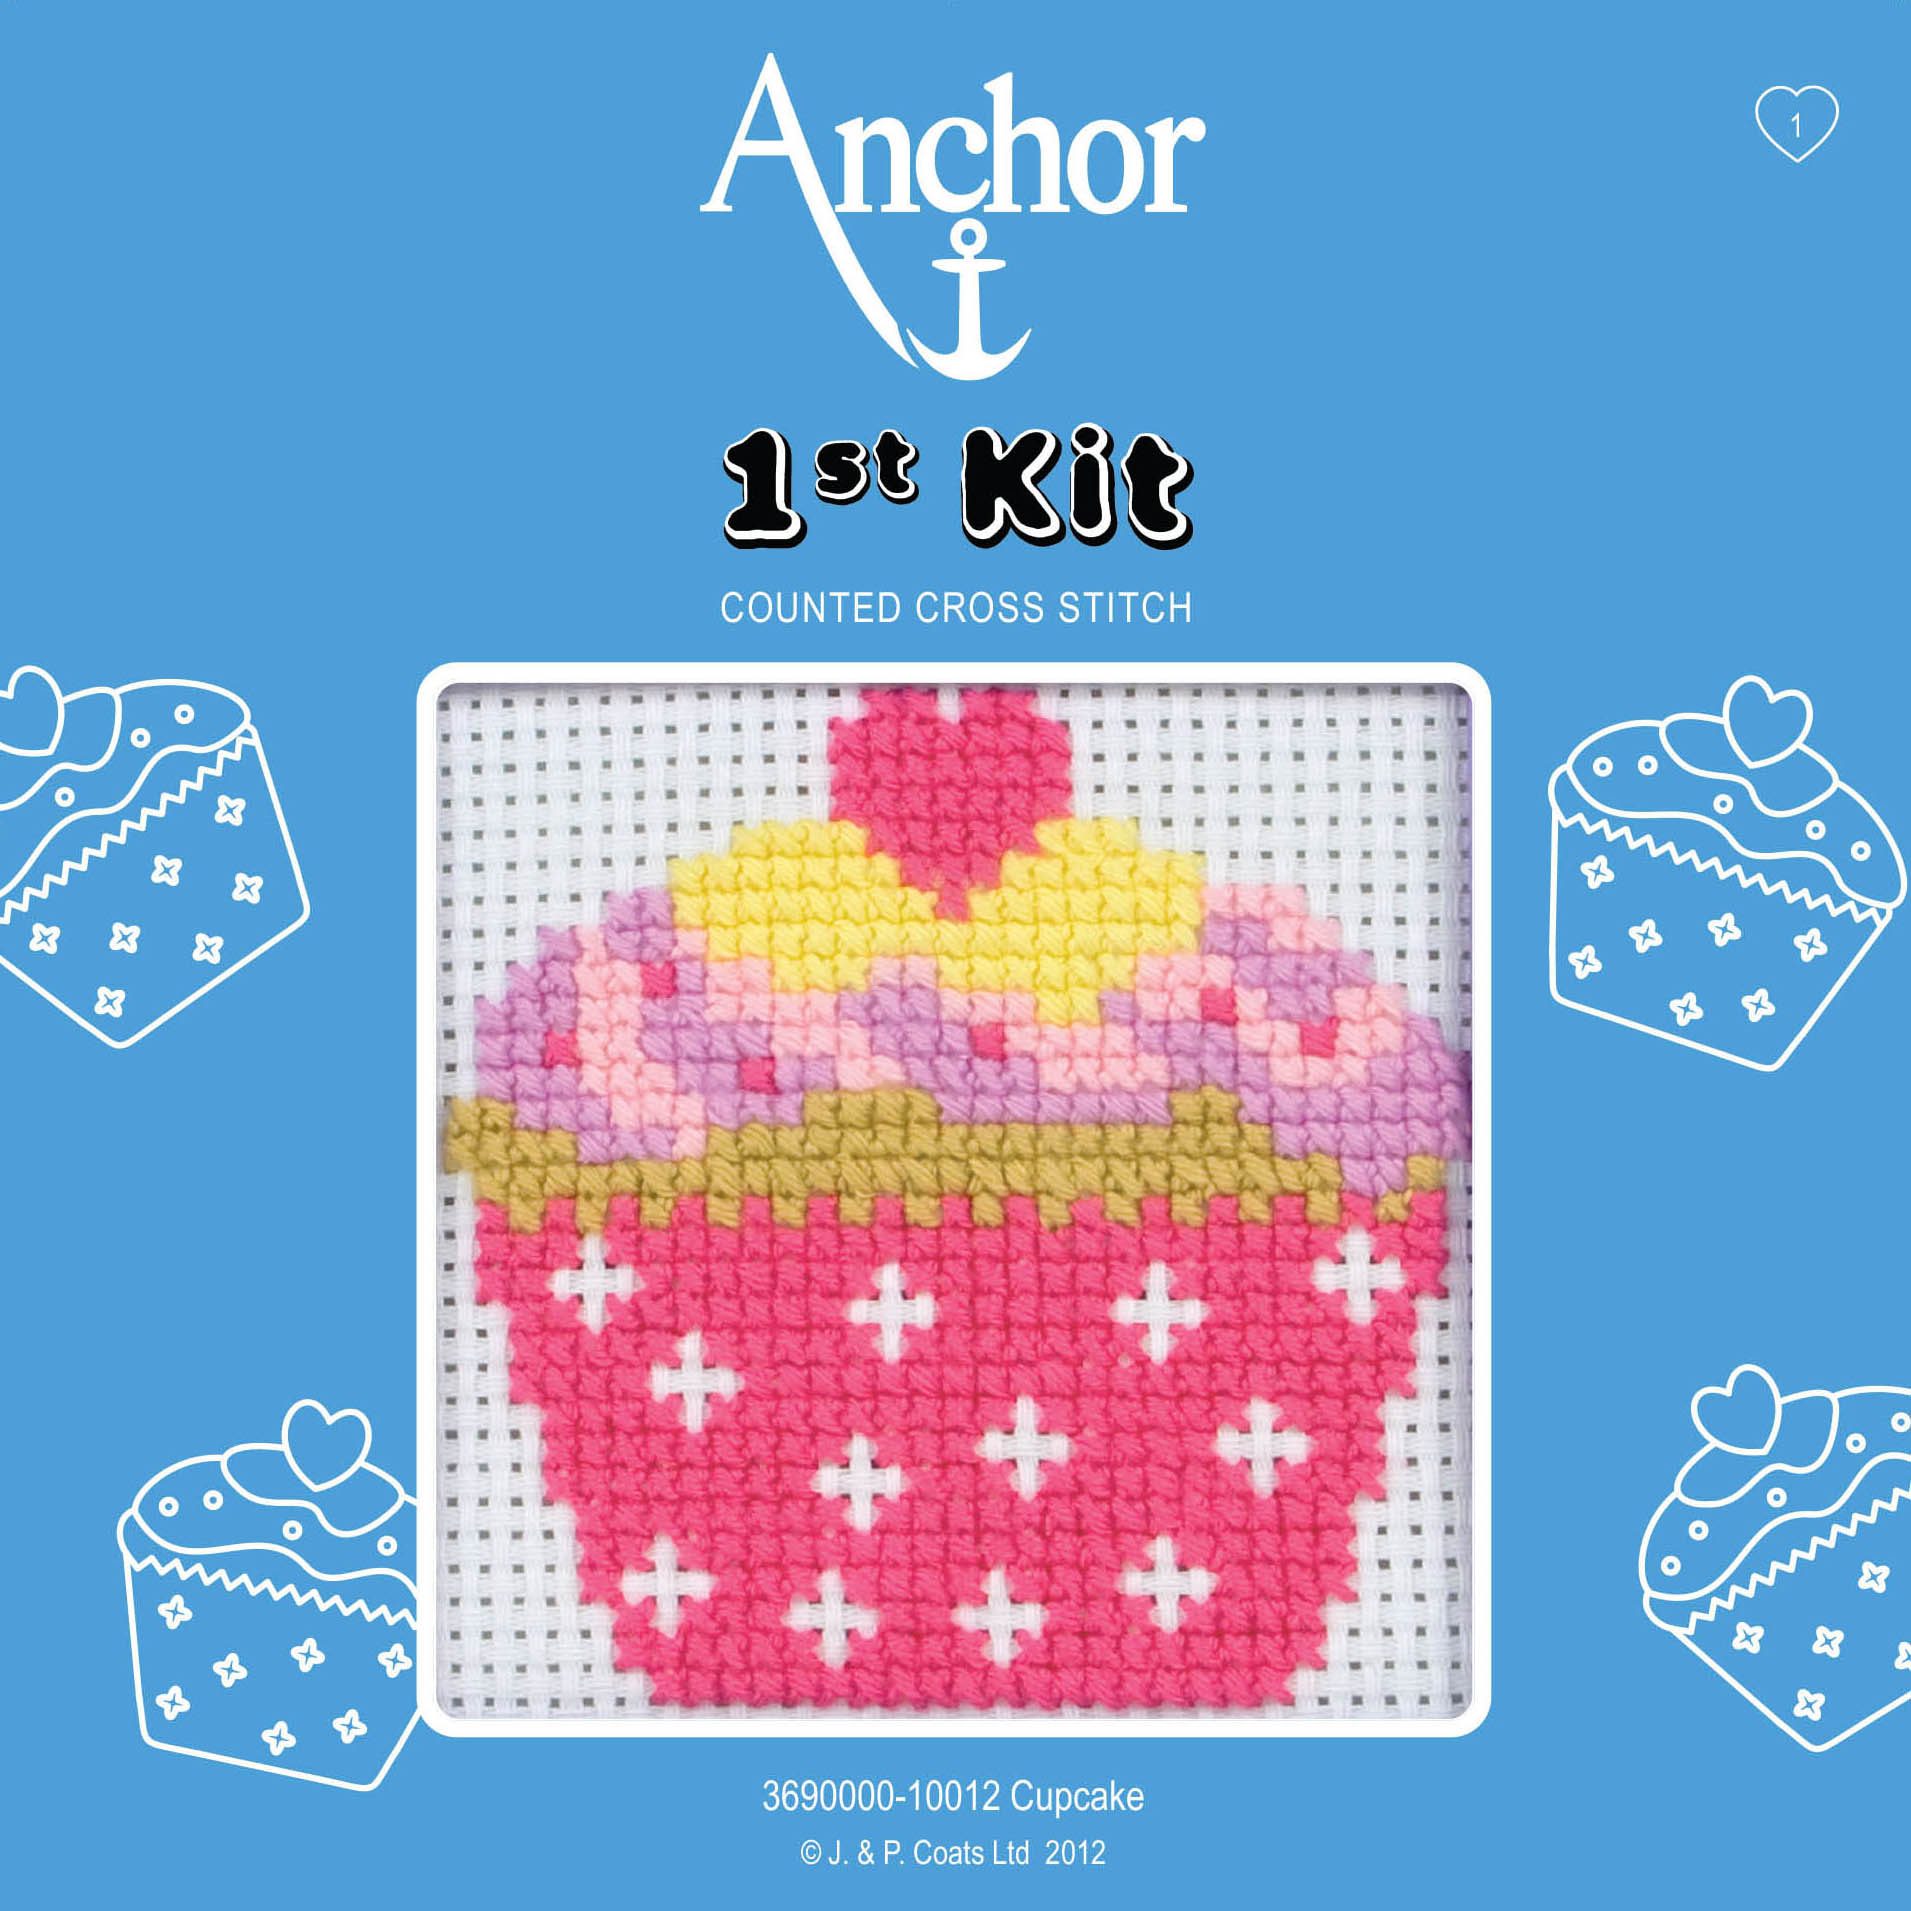 Anchor 1st Counted Cross Stitch Kit - Cupcake product image